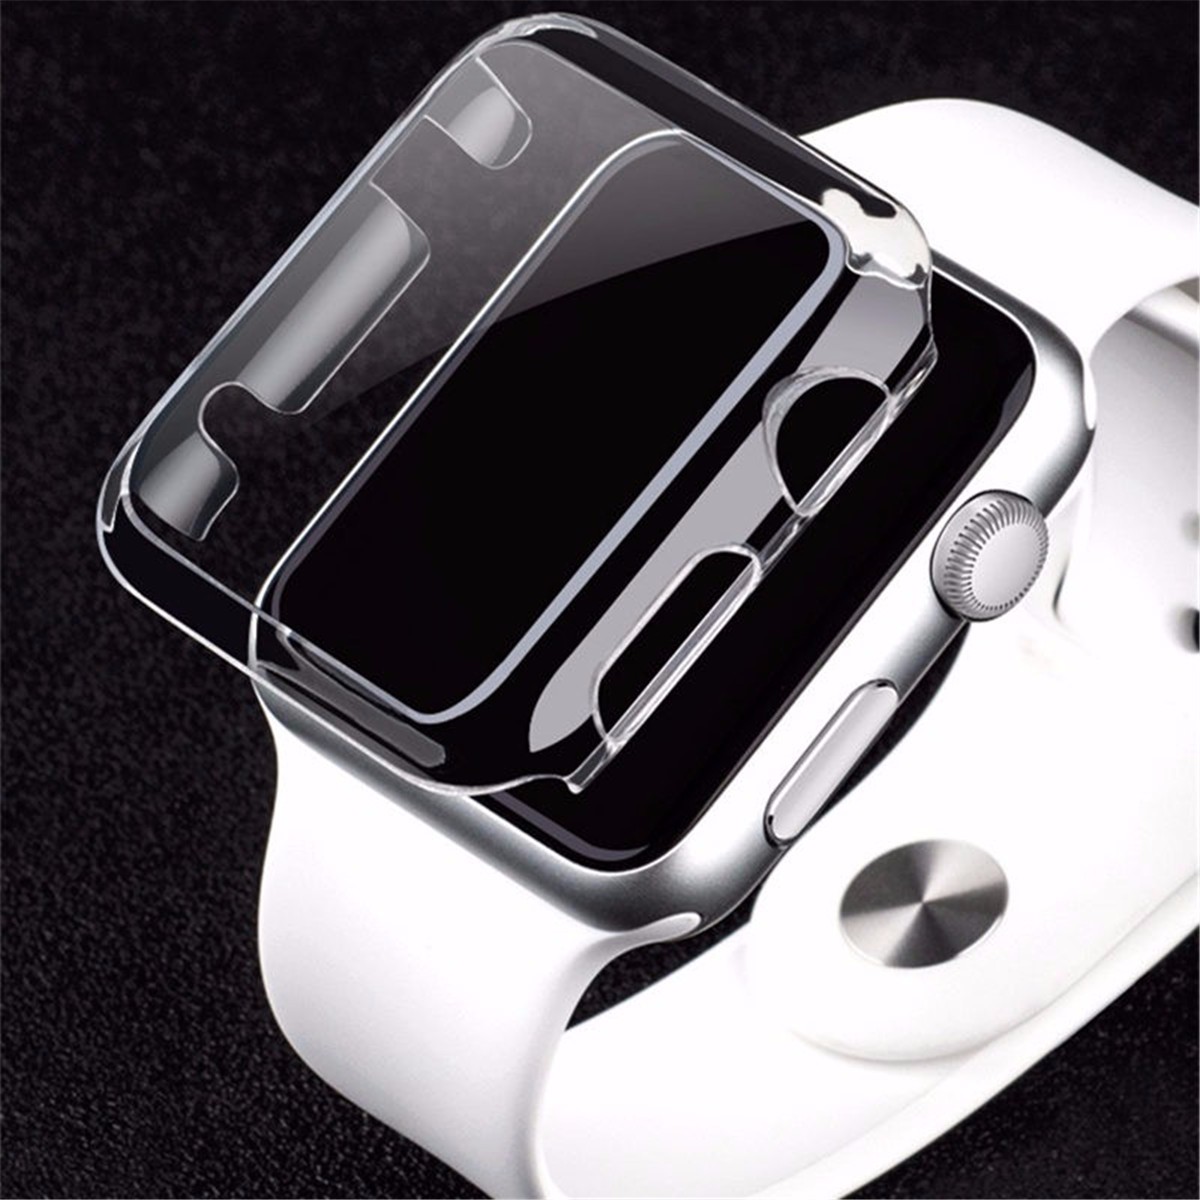 Transparent-Clear-Thin-Hard-Clip-On-Case-Cover-Screen-Protector-For-3842mm-Apple-Watch-1-1107650